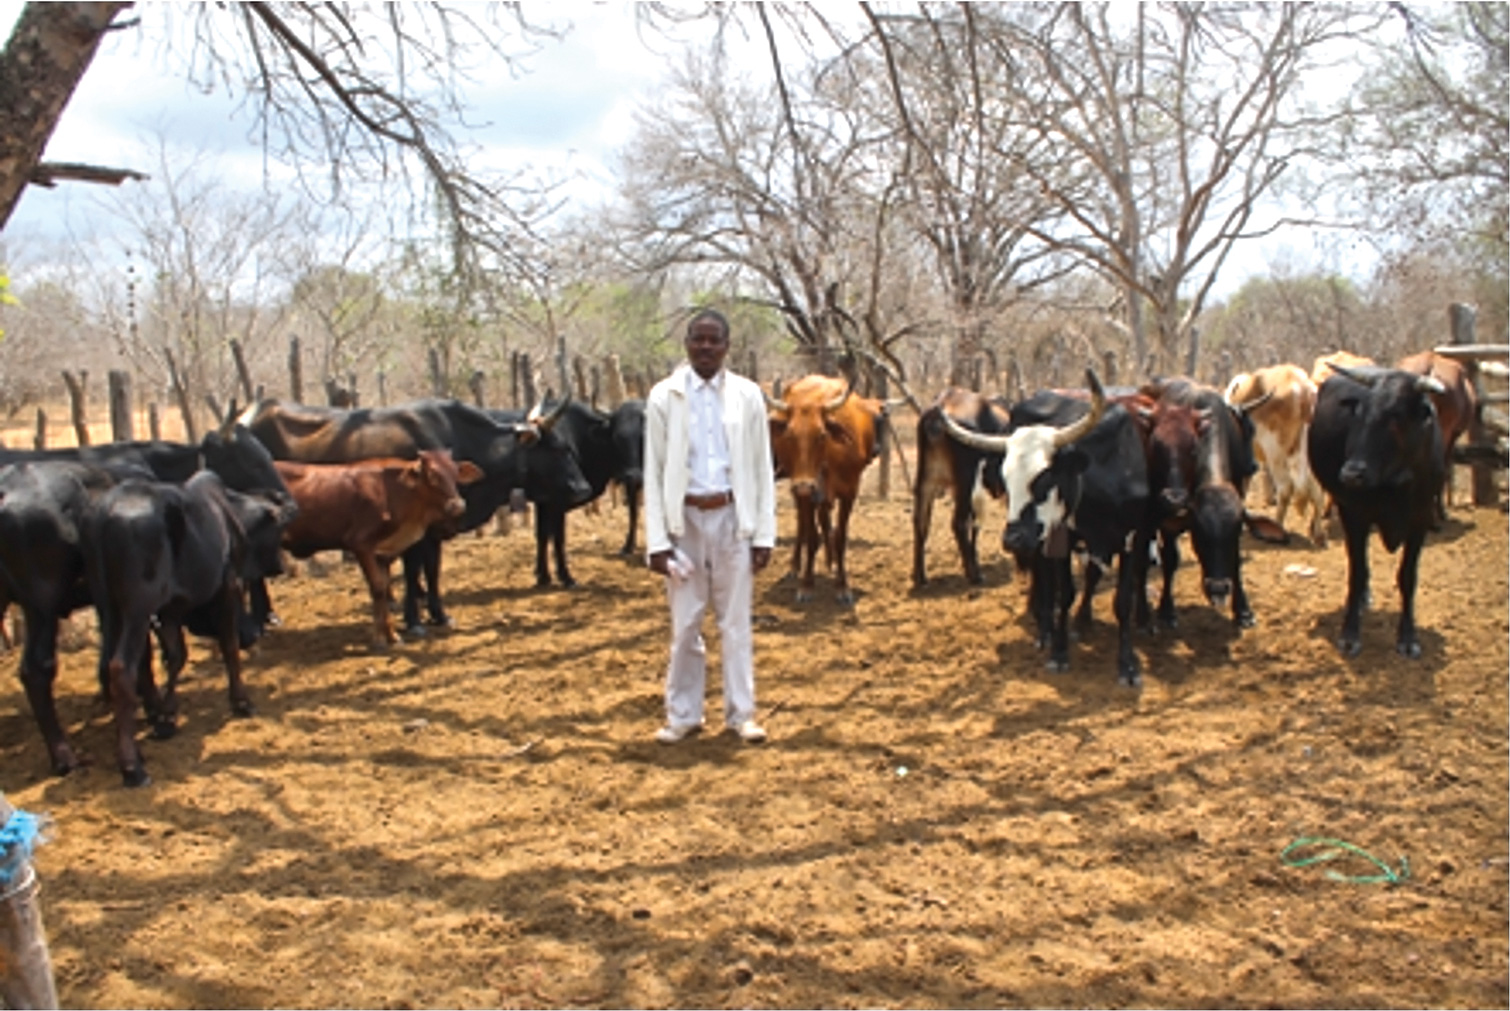 A man stands in a field surrounded by cattle.